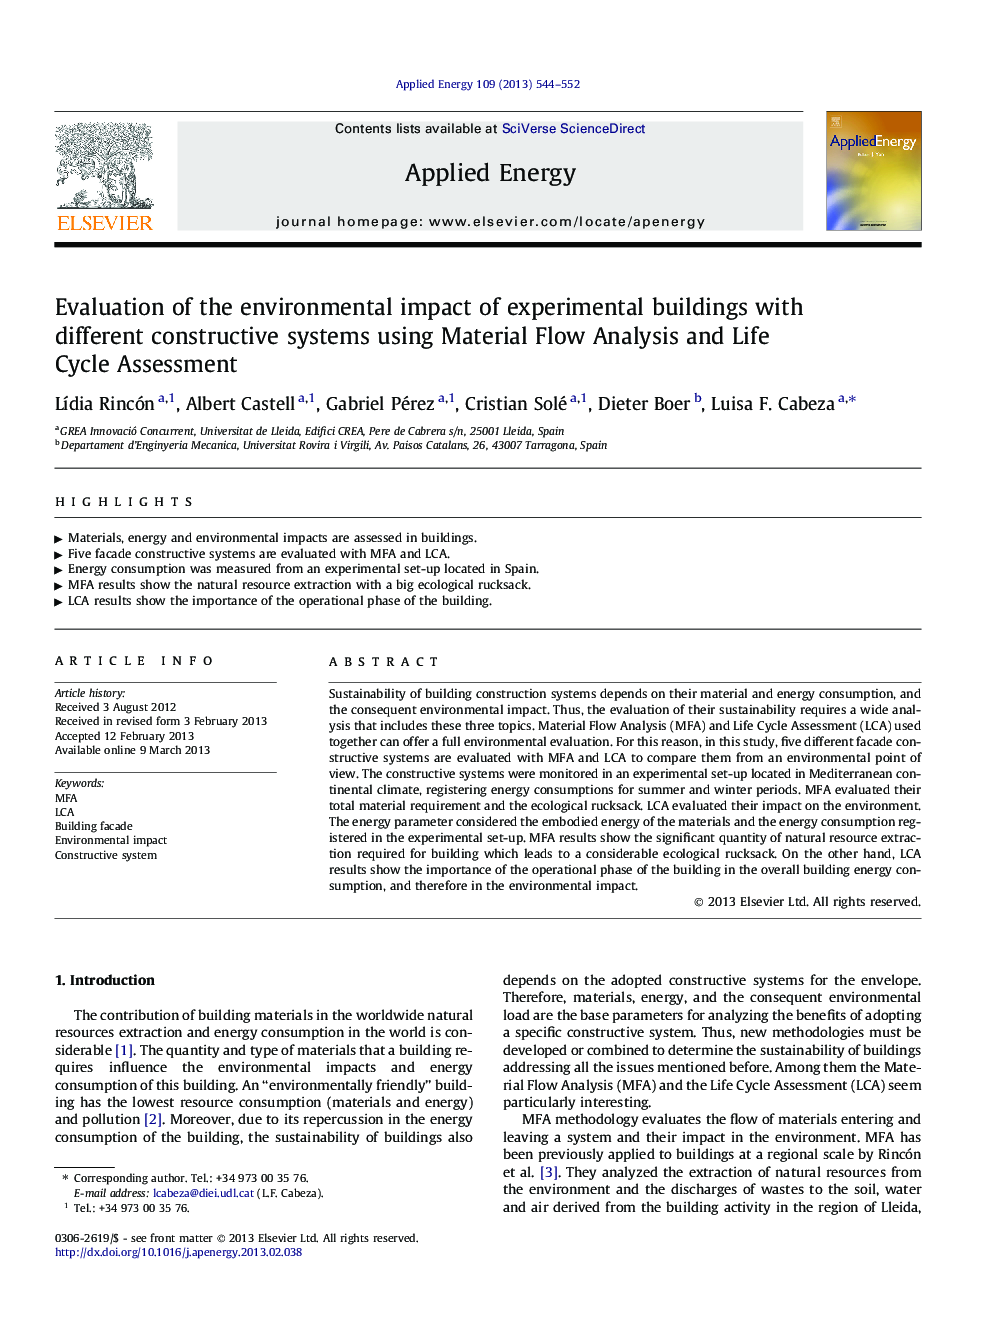 Evaluation of the environmental impact of experimental buildings with different constructive systems using Material Flow Analysis and Life Cycle Assessment